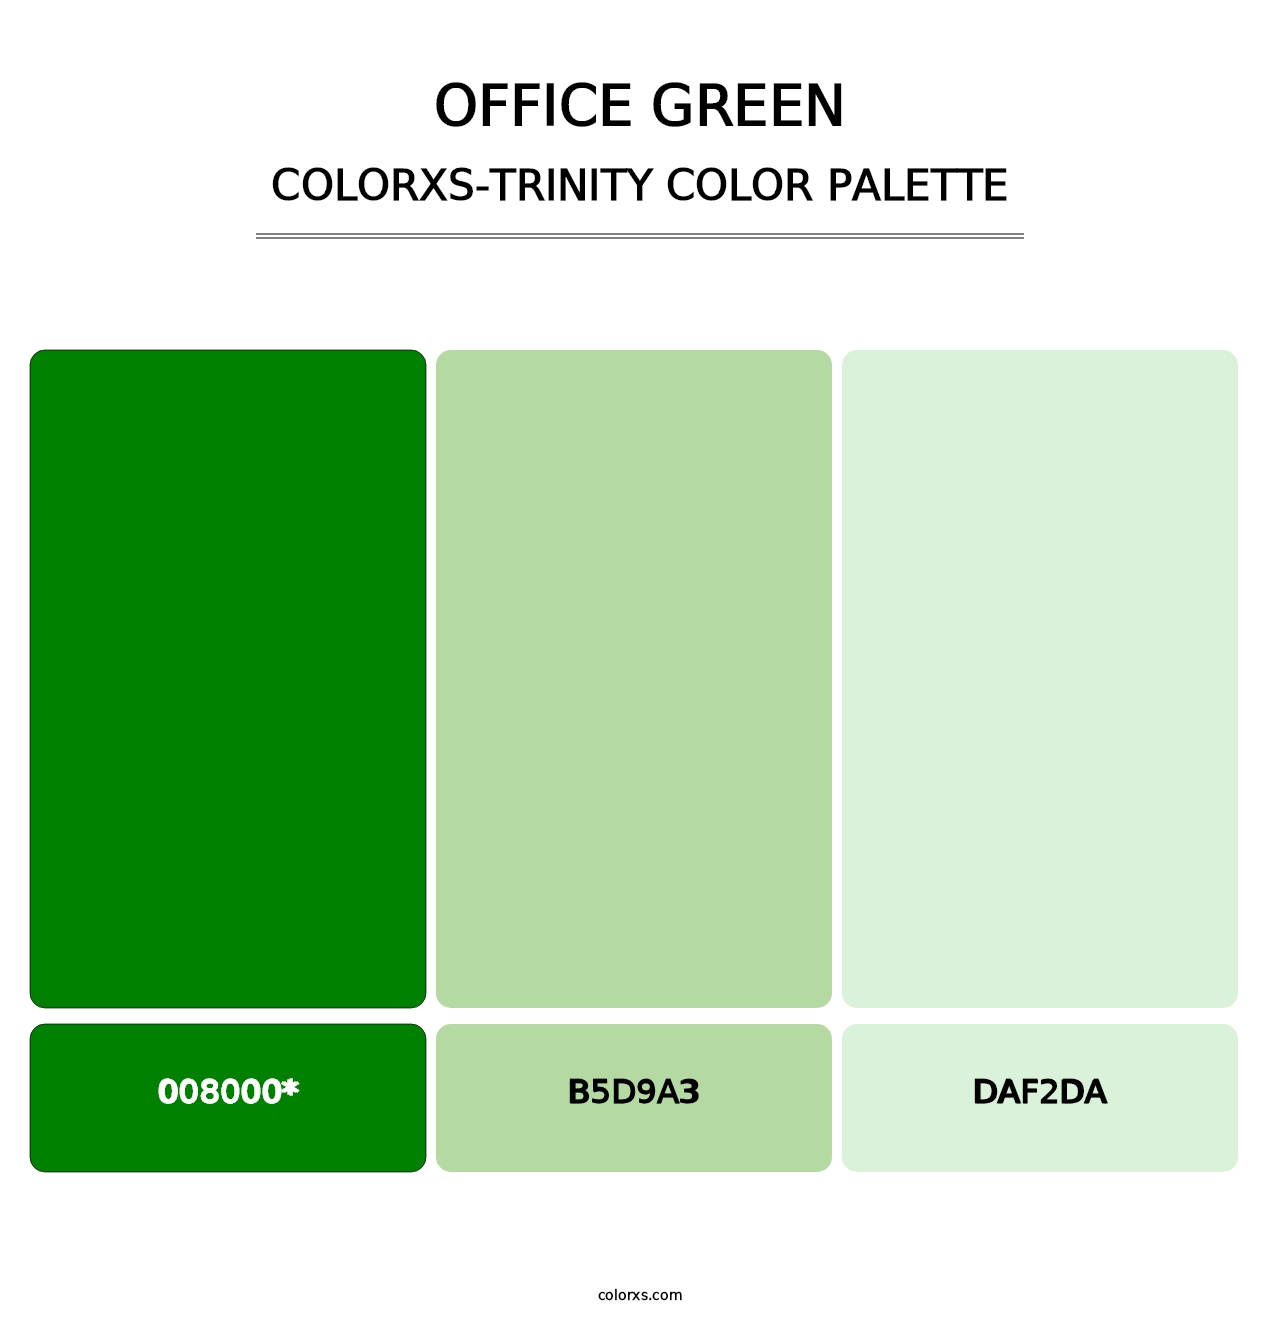 Office Green - Colorxs Trinity Palette